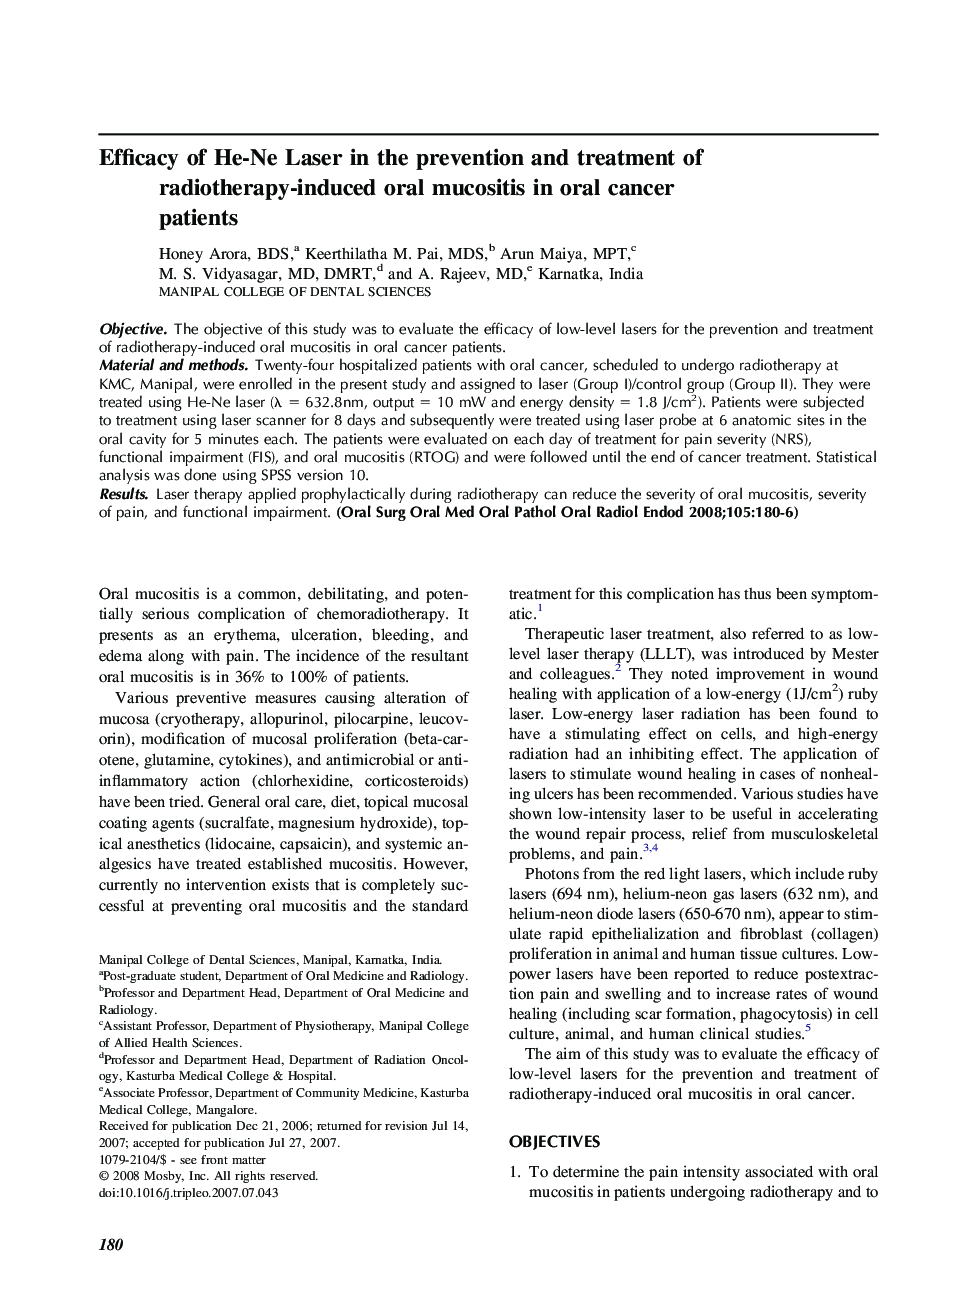 Efficacy of He-Ne Laser in the prevention and treatment of radiotherapy-induced oral mucositis in oral cancer patients